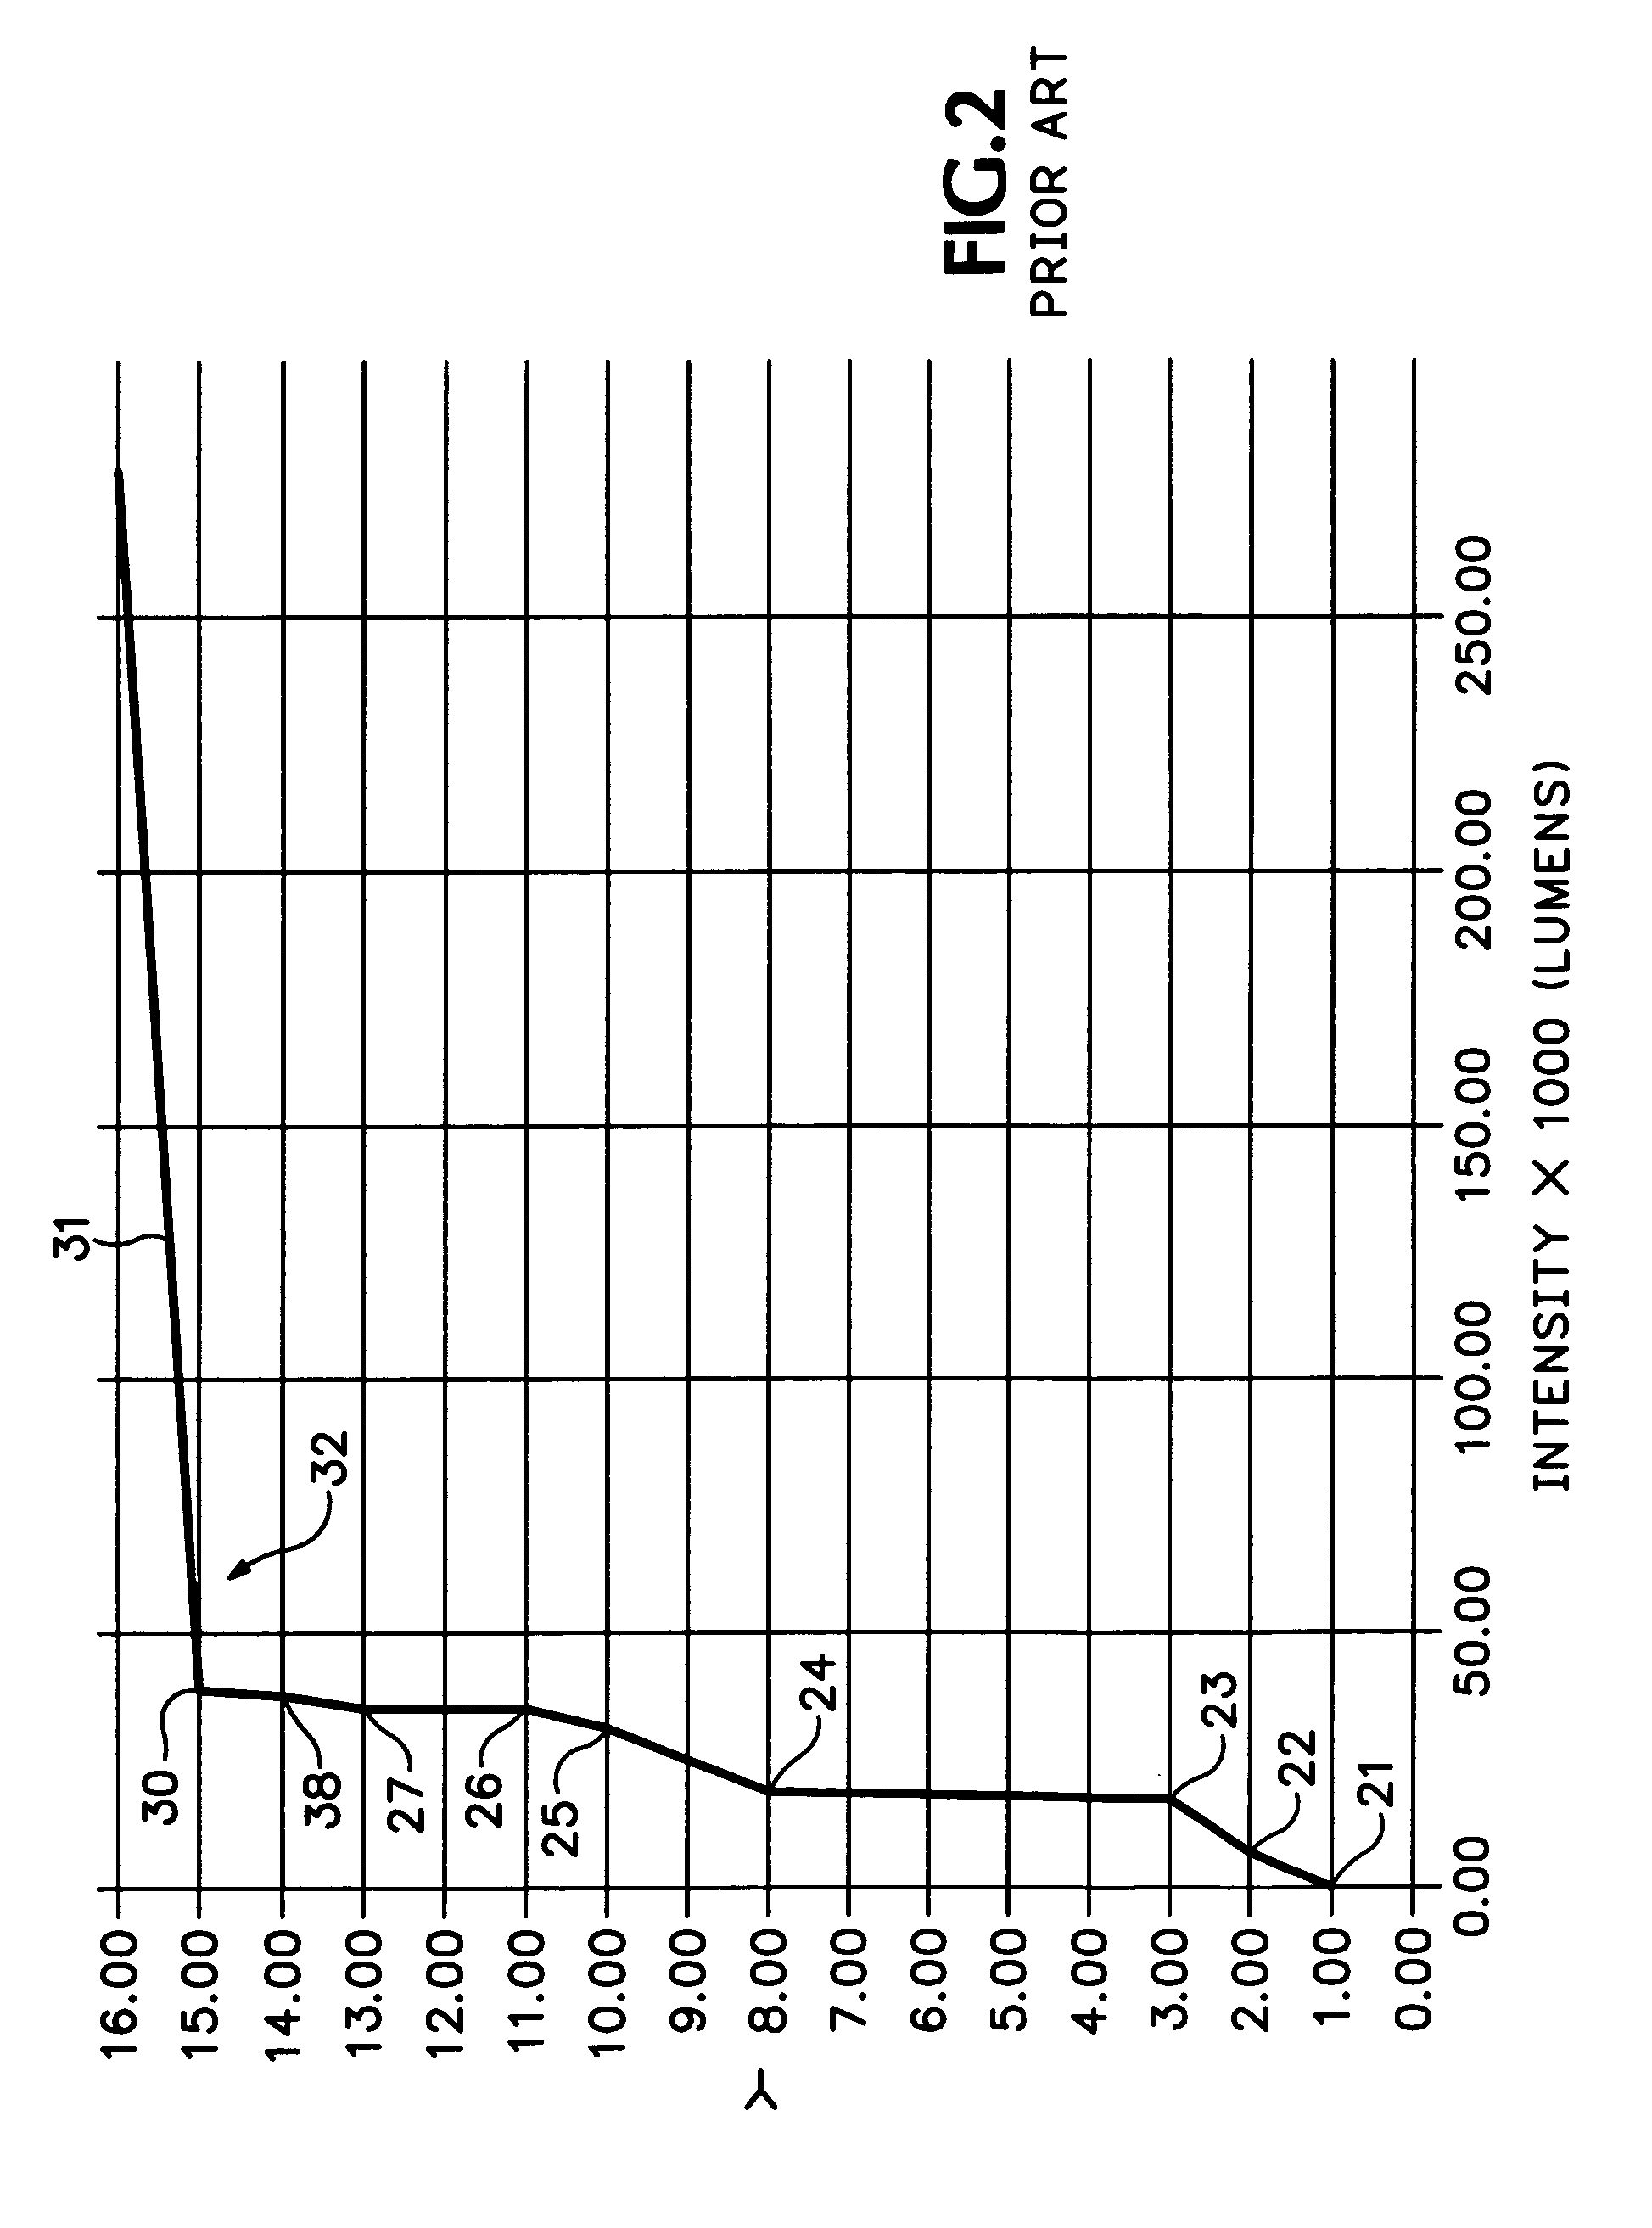 Histogram data collector for applying progressively adjusted histogram equalization to an oscilloscope image